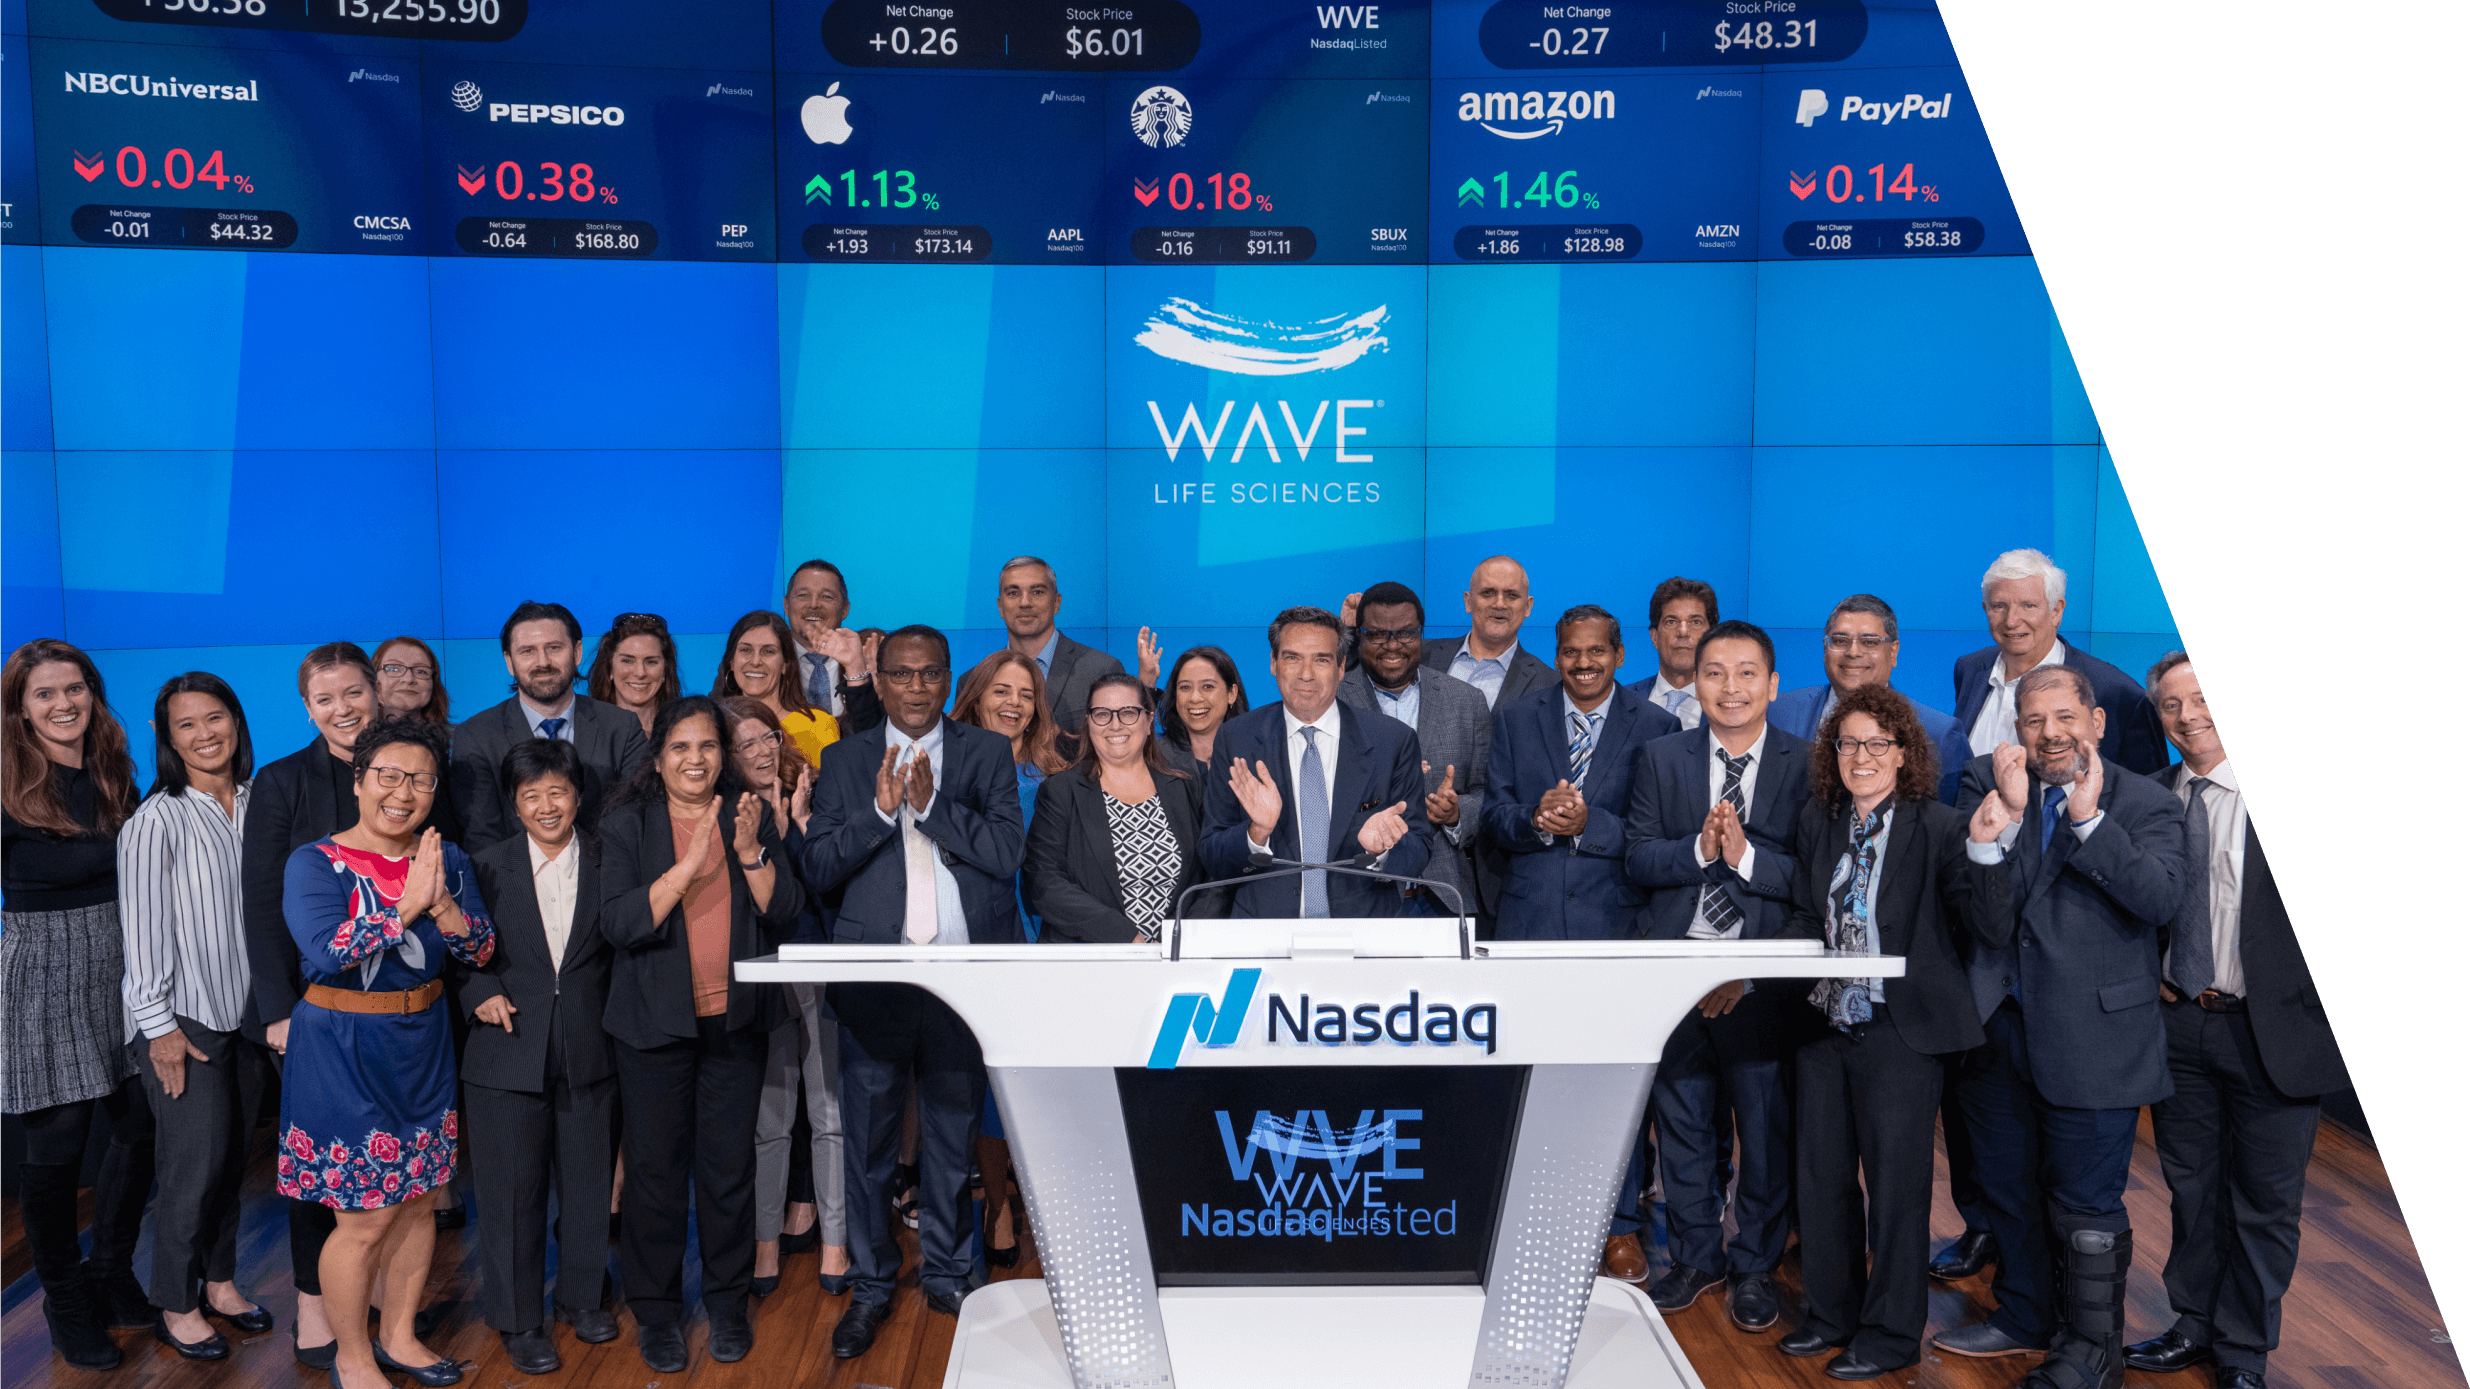 Wave Life Sciences initial public offering with Nasdaq